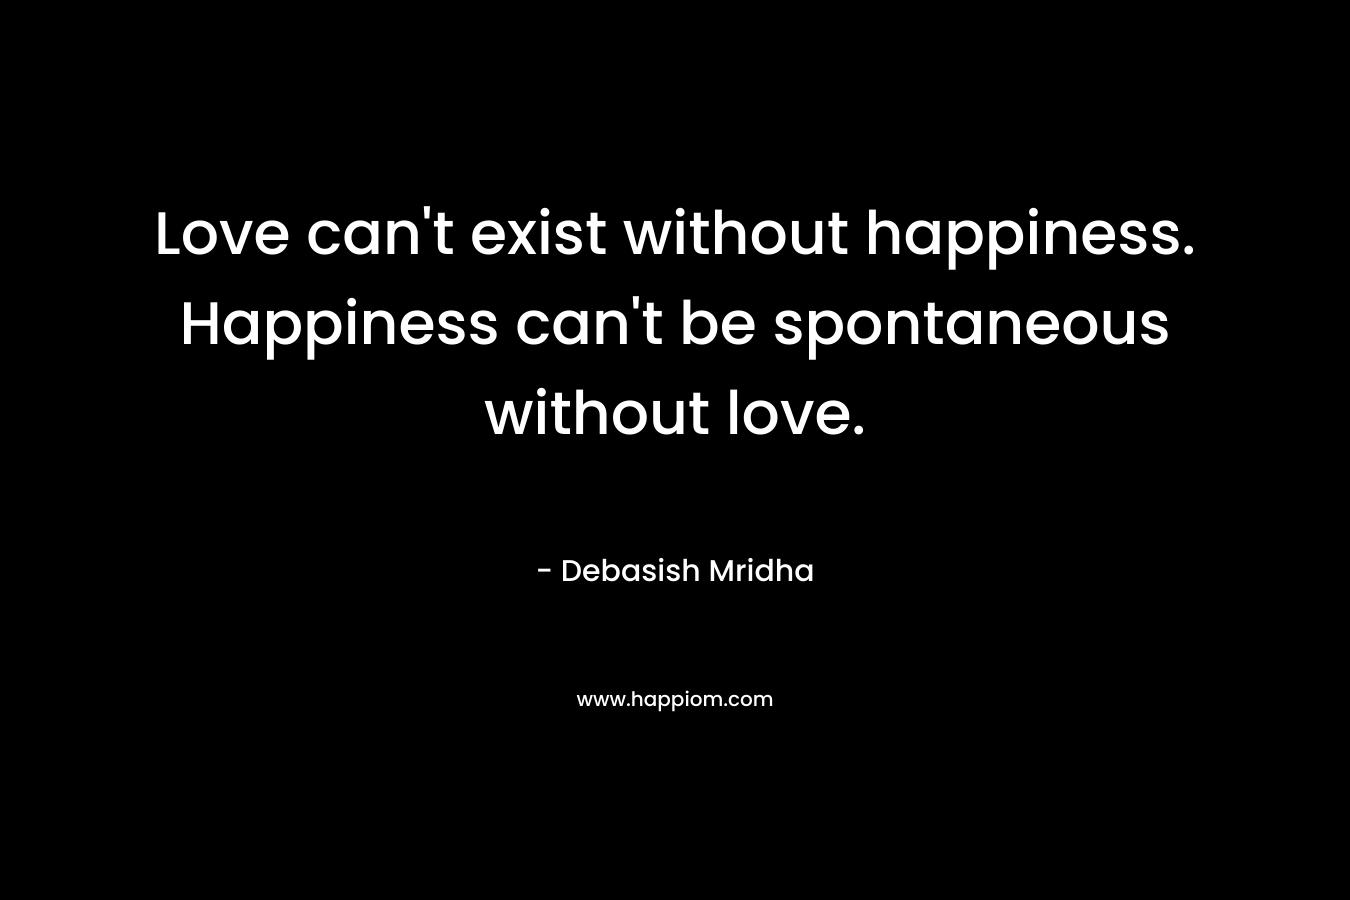 Love can't exist without happiness. Happiness can't be spontaneous without love.